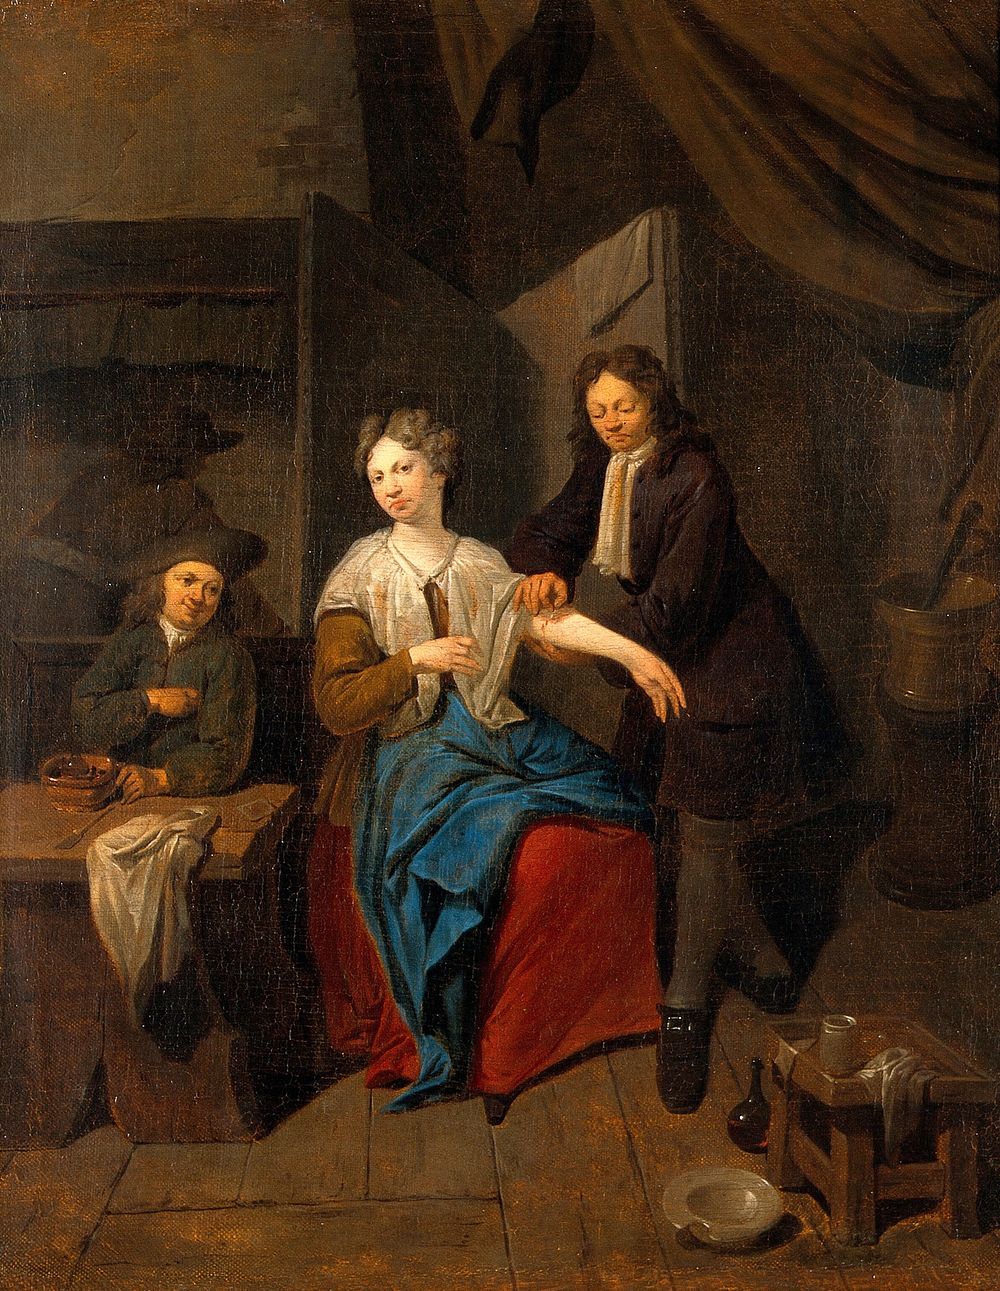 A surgeon preparing to let blood by cupping, his apprentice warming the cupping glass. Oil painting attributed to Jan…